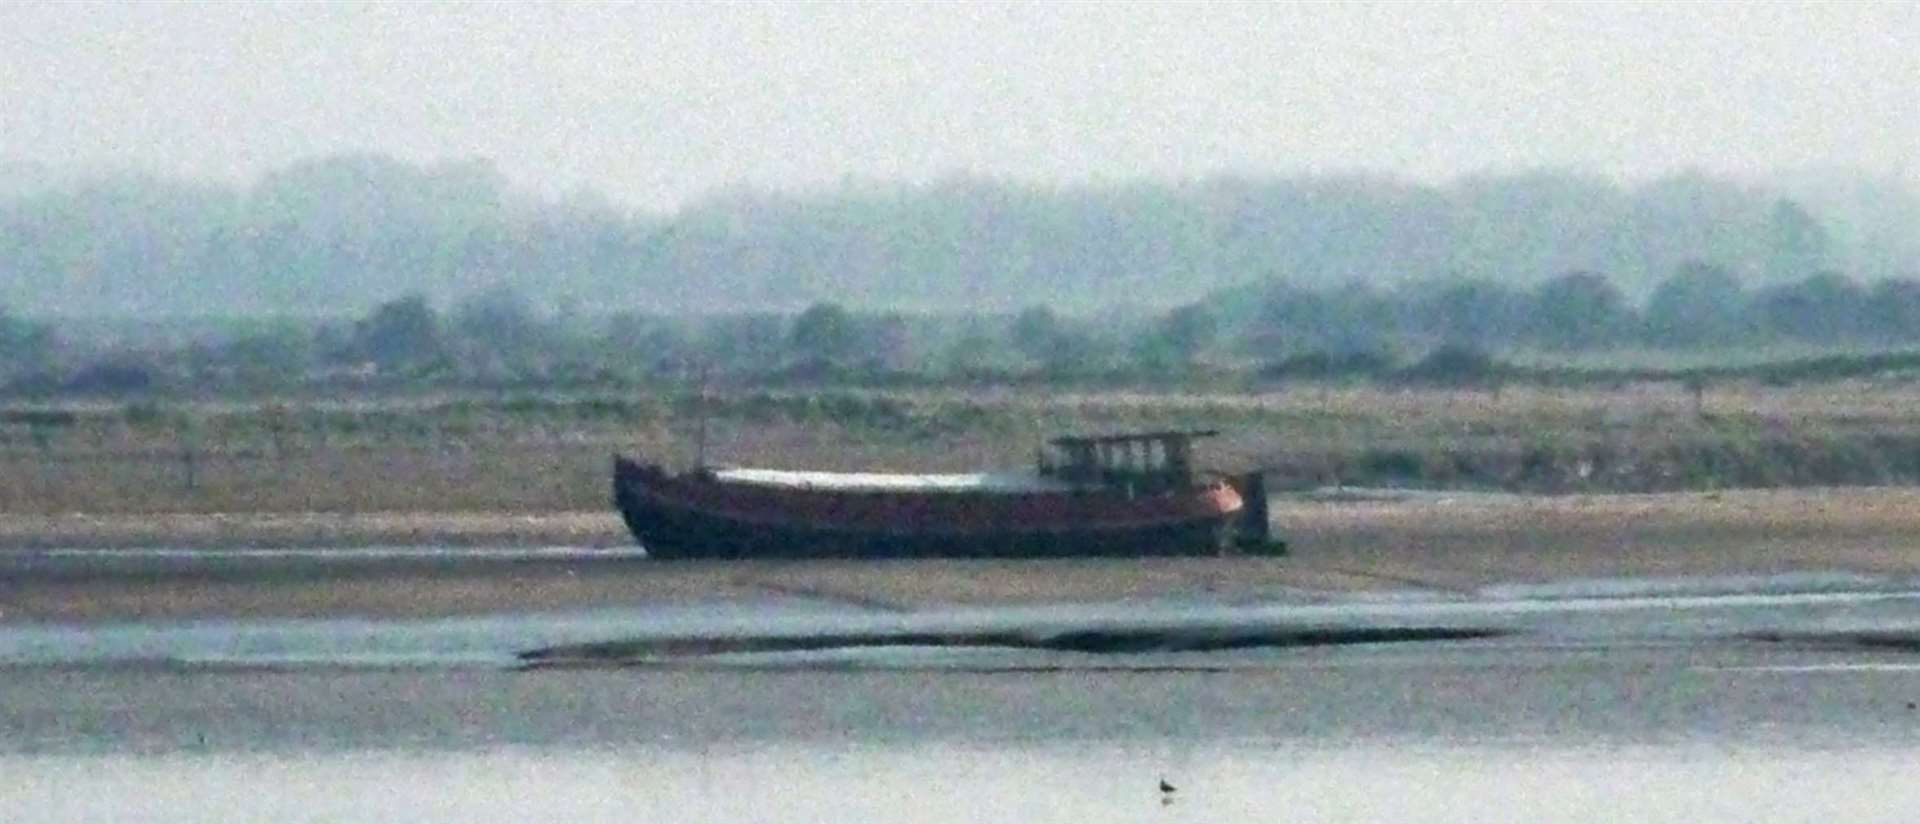 A boat that became stuck in Pegwell Bay was towed by Ramsgate Lifeboat